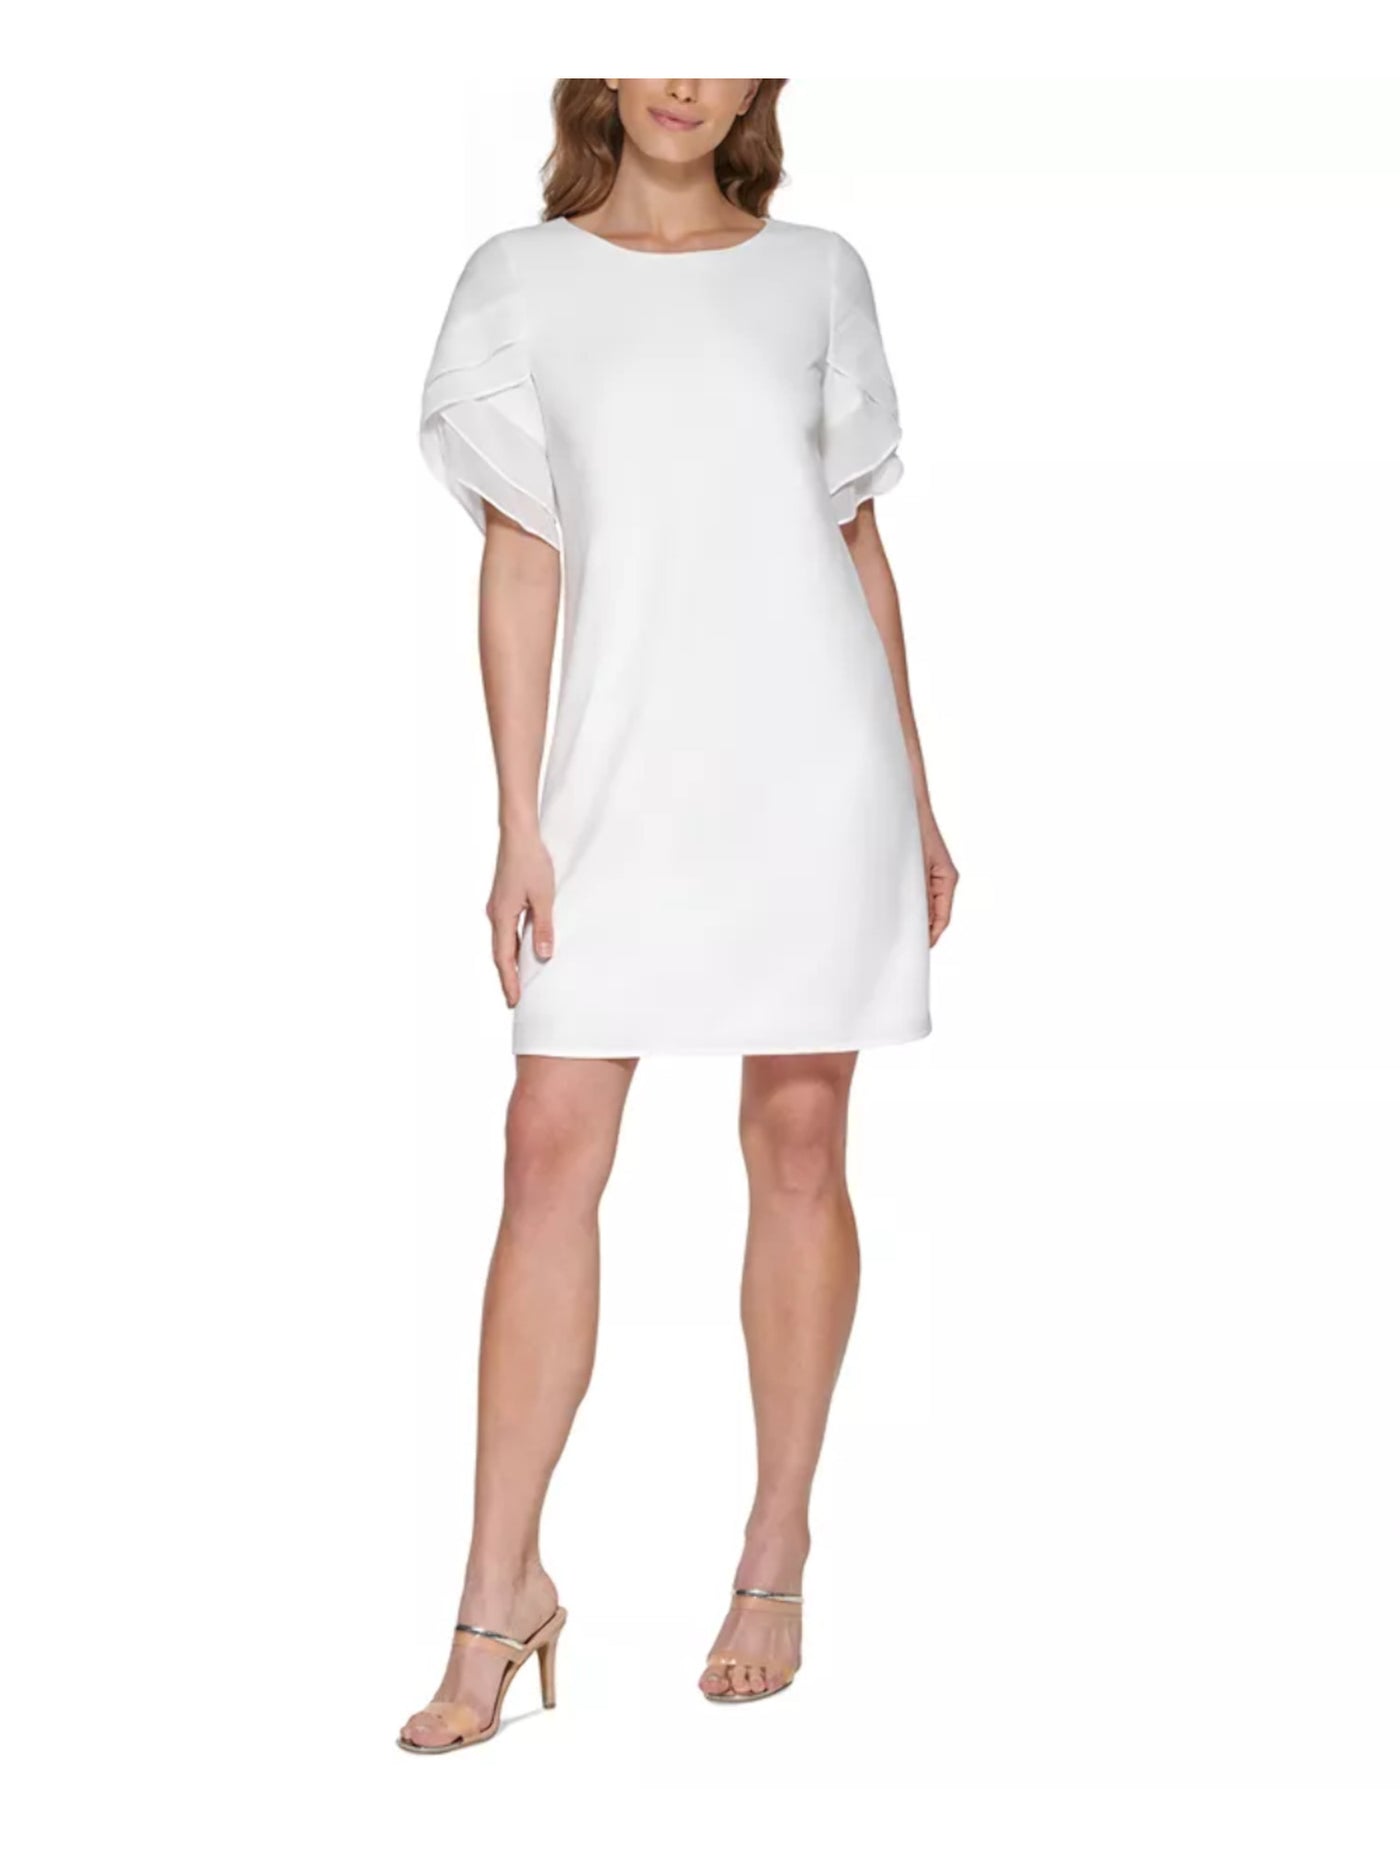 DKNY Womens White Zippered Tiered Lined Pouf Sleeve Round Neck Above The Knee Wear To Work Shift Dress 8